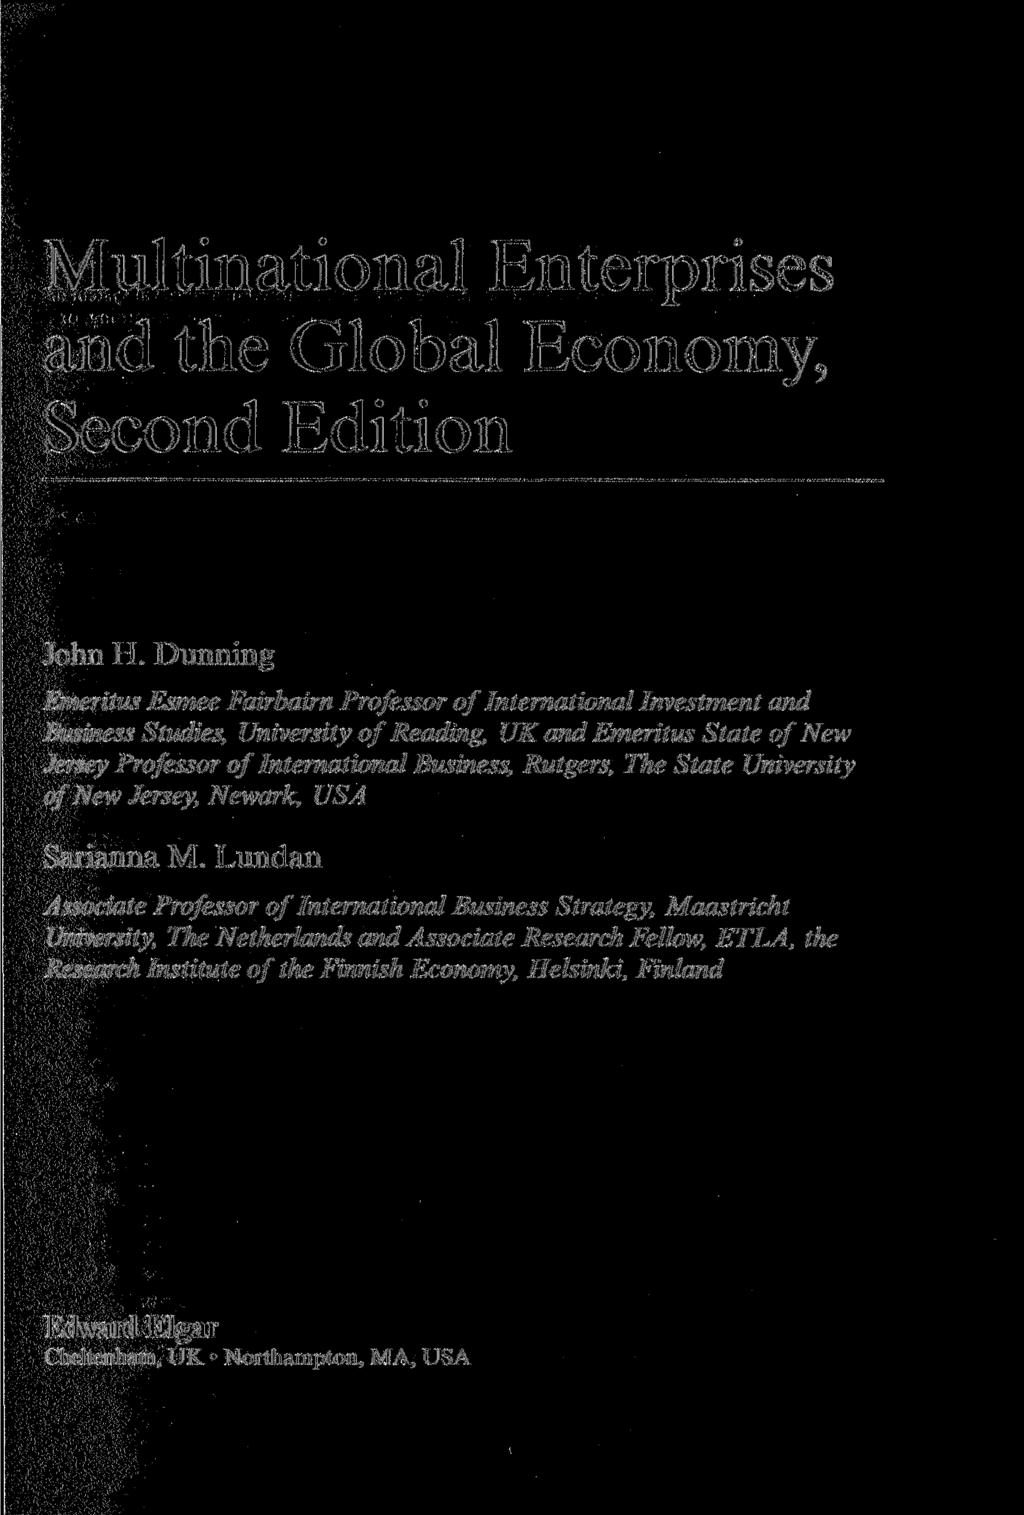 Multinational Enterprises and the Global Economy, Second Edition John H.